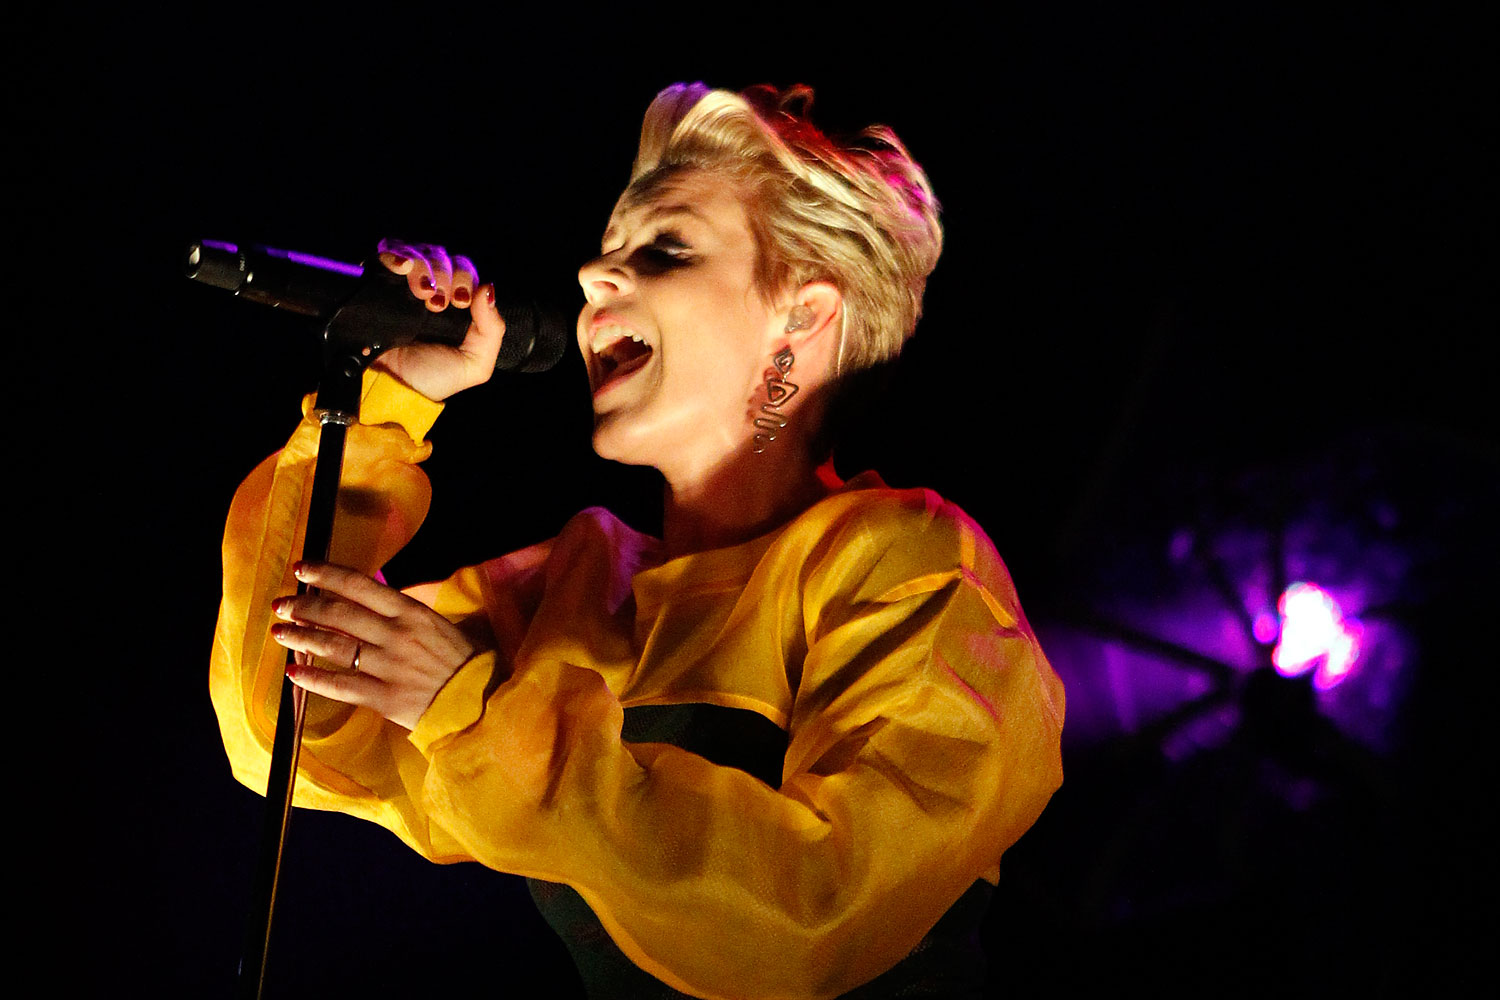 Robyn performs at Brixton Academy on November 1, 2012 in London, England.